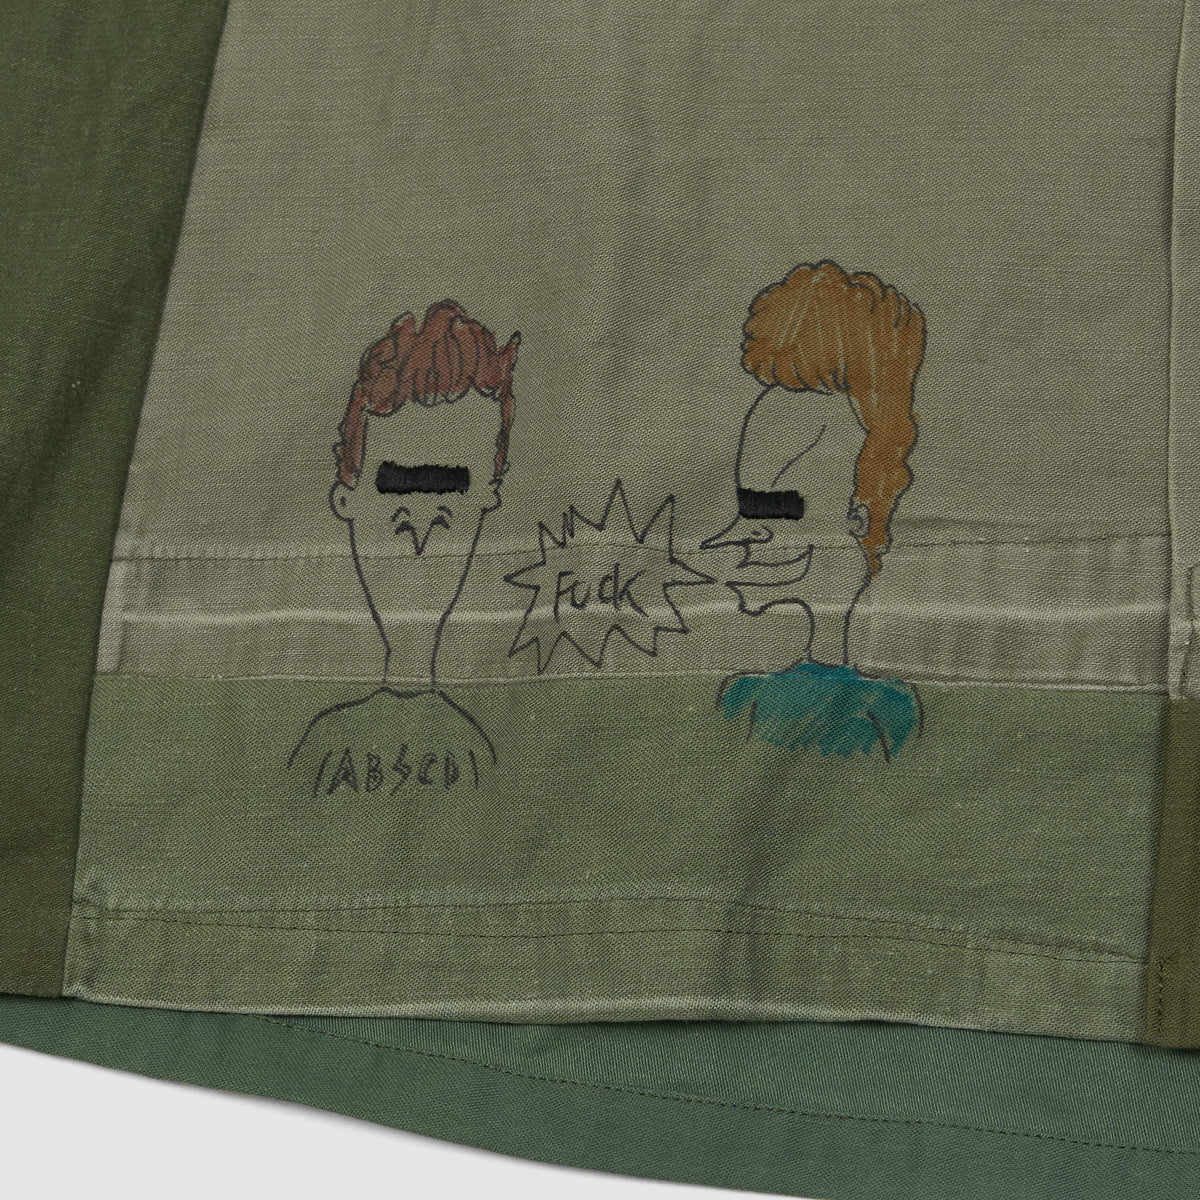 From Muu Army Overshirt Cartoon Paintings and Hand Embroidered